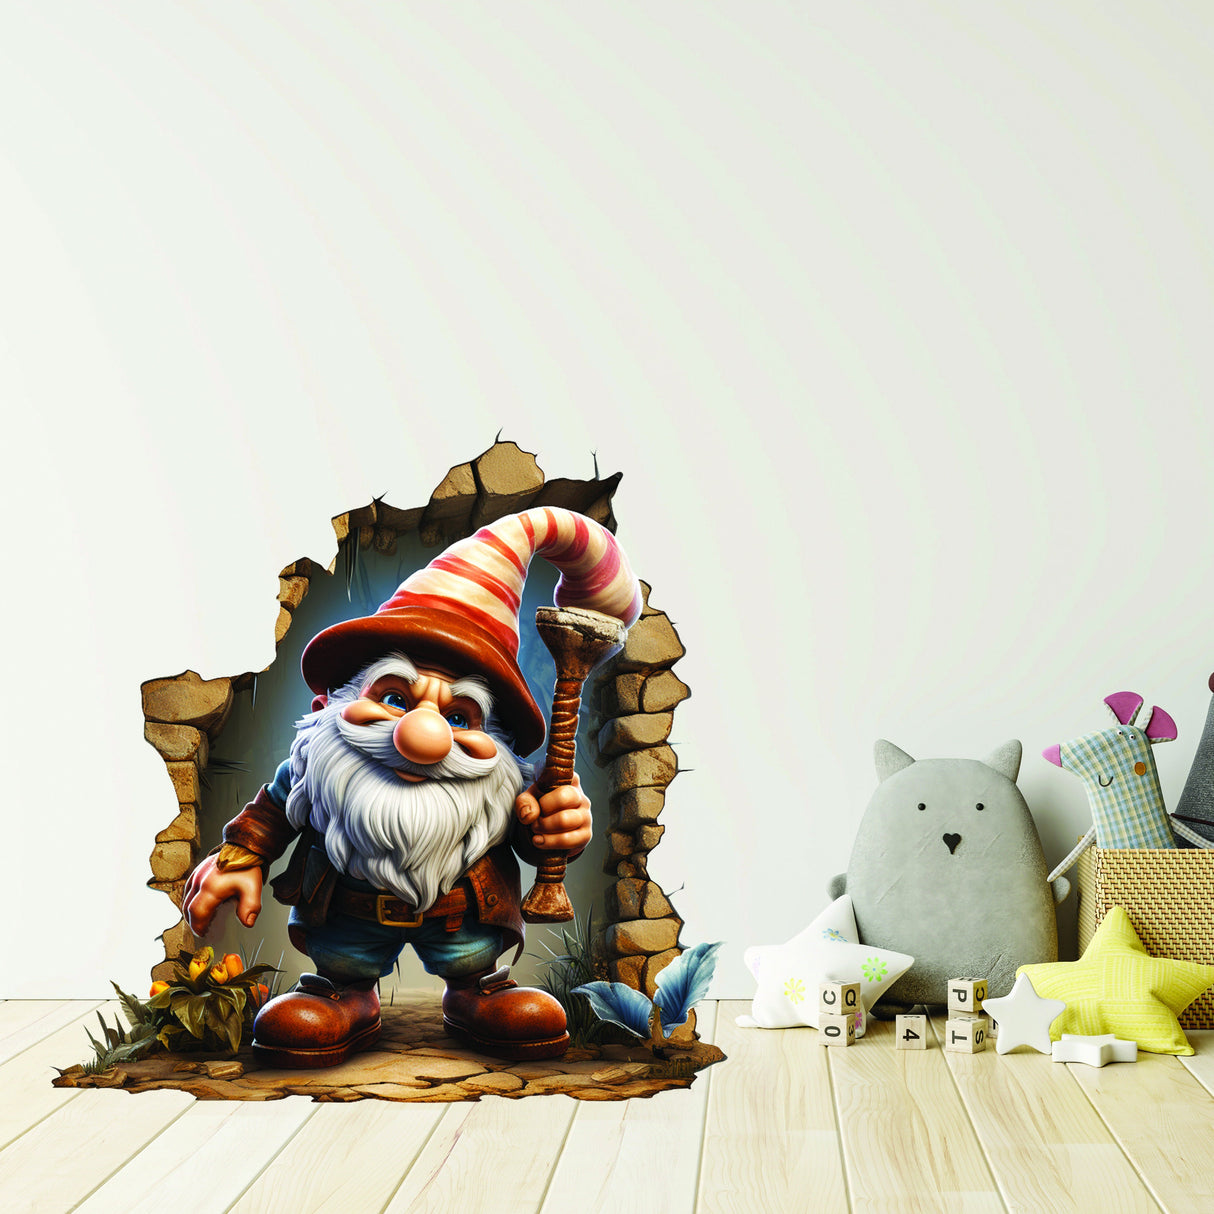 3D Gnome Wall Hole Sticker - Whimsical Troll Hole Decal - Enchanting Home Decor - Fantasy Wall Art - Many sizes to choose from